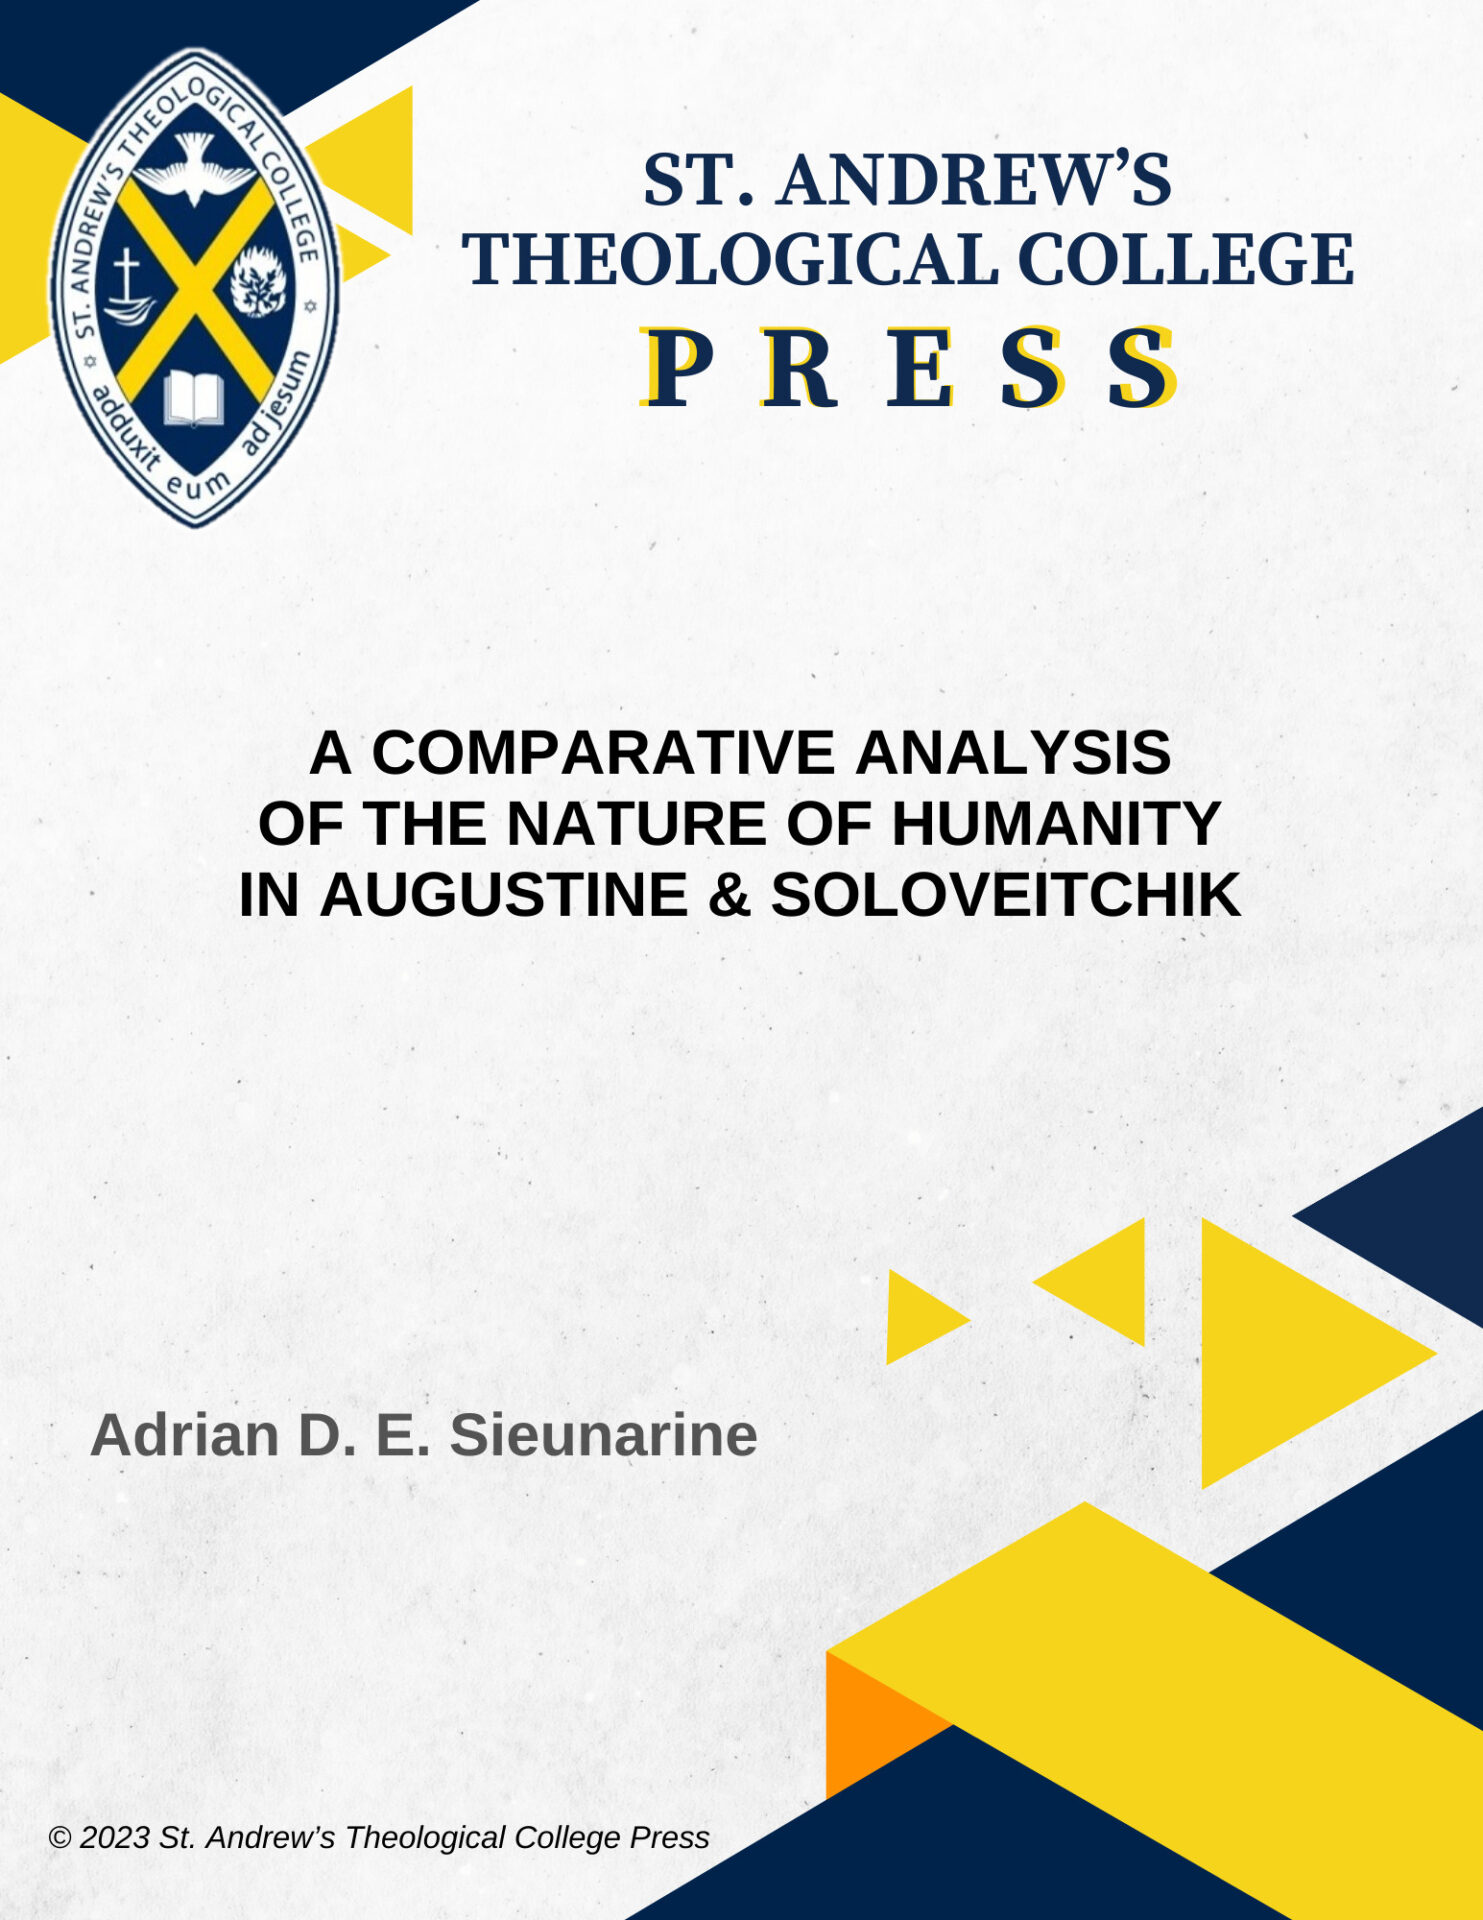 A Comparative Analysis of the Nature of Humanity in Augustine and Soloveitchik